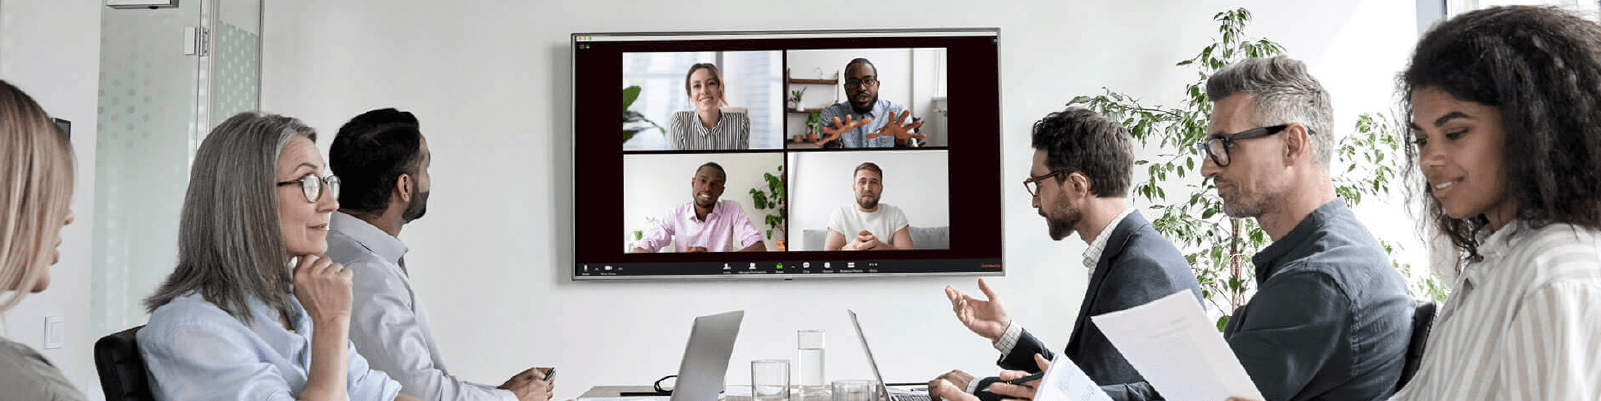 The Real Challenge with Hybrid Meetings